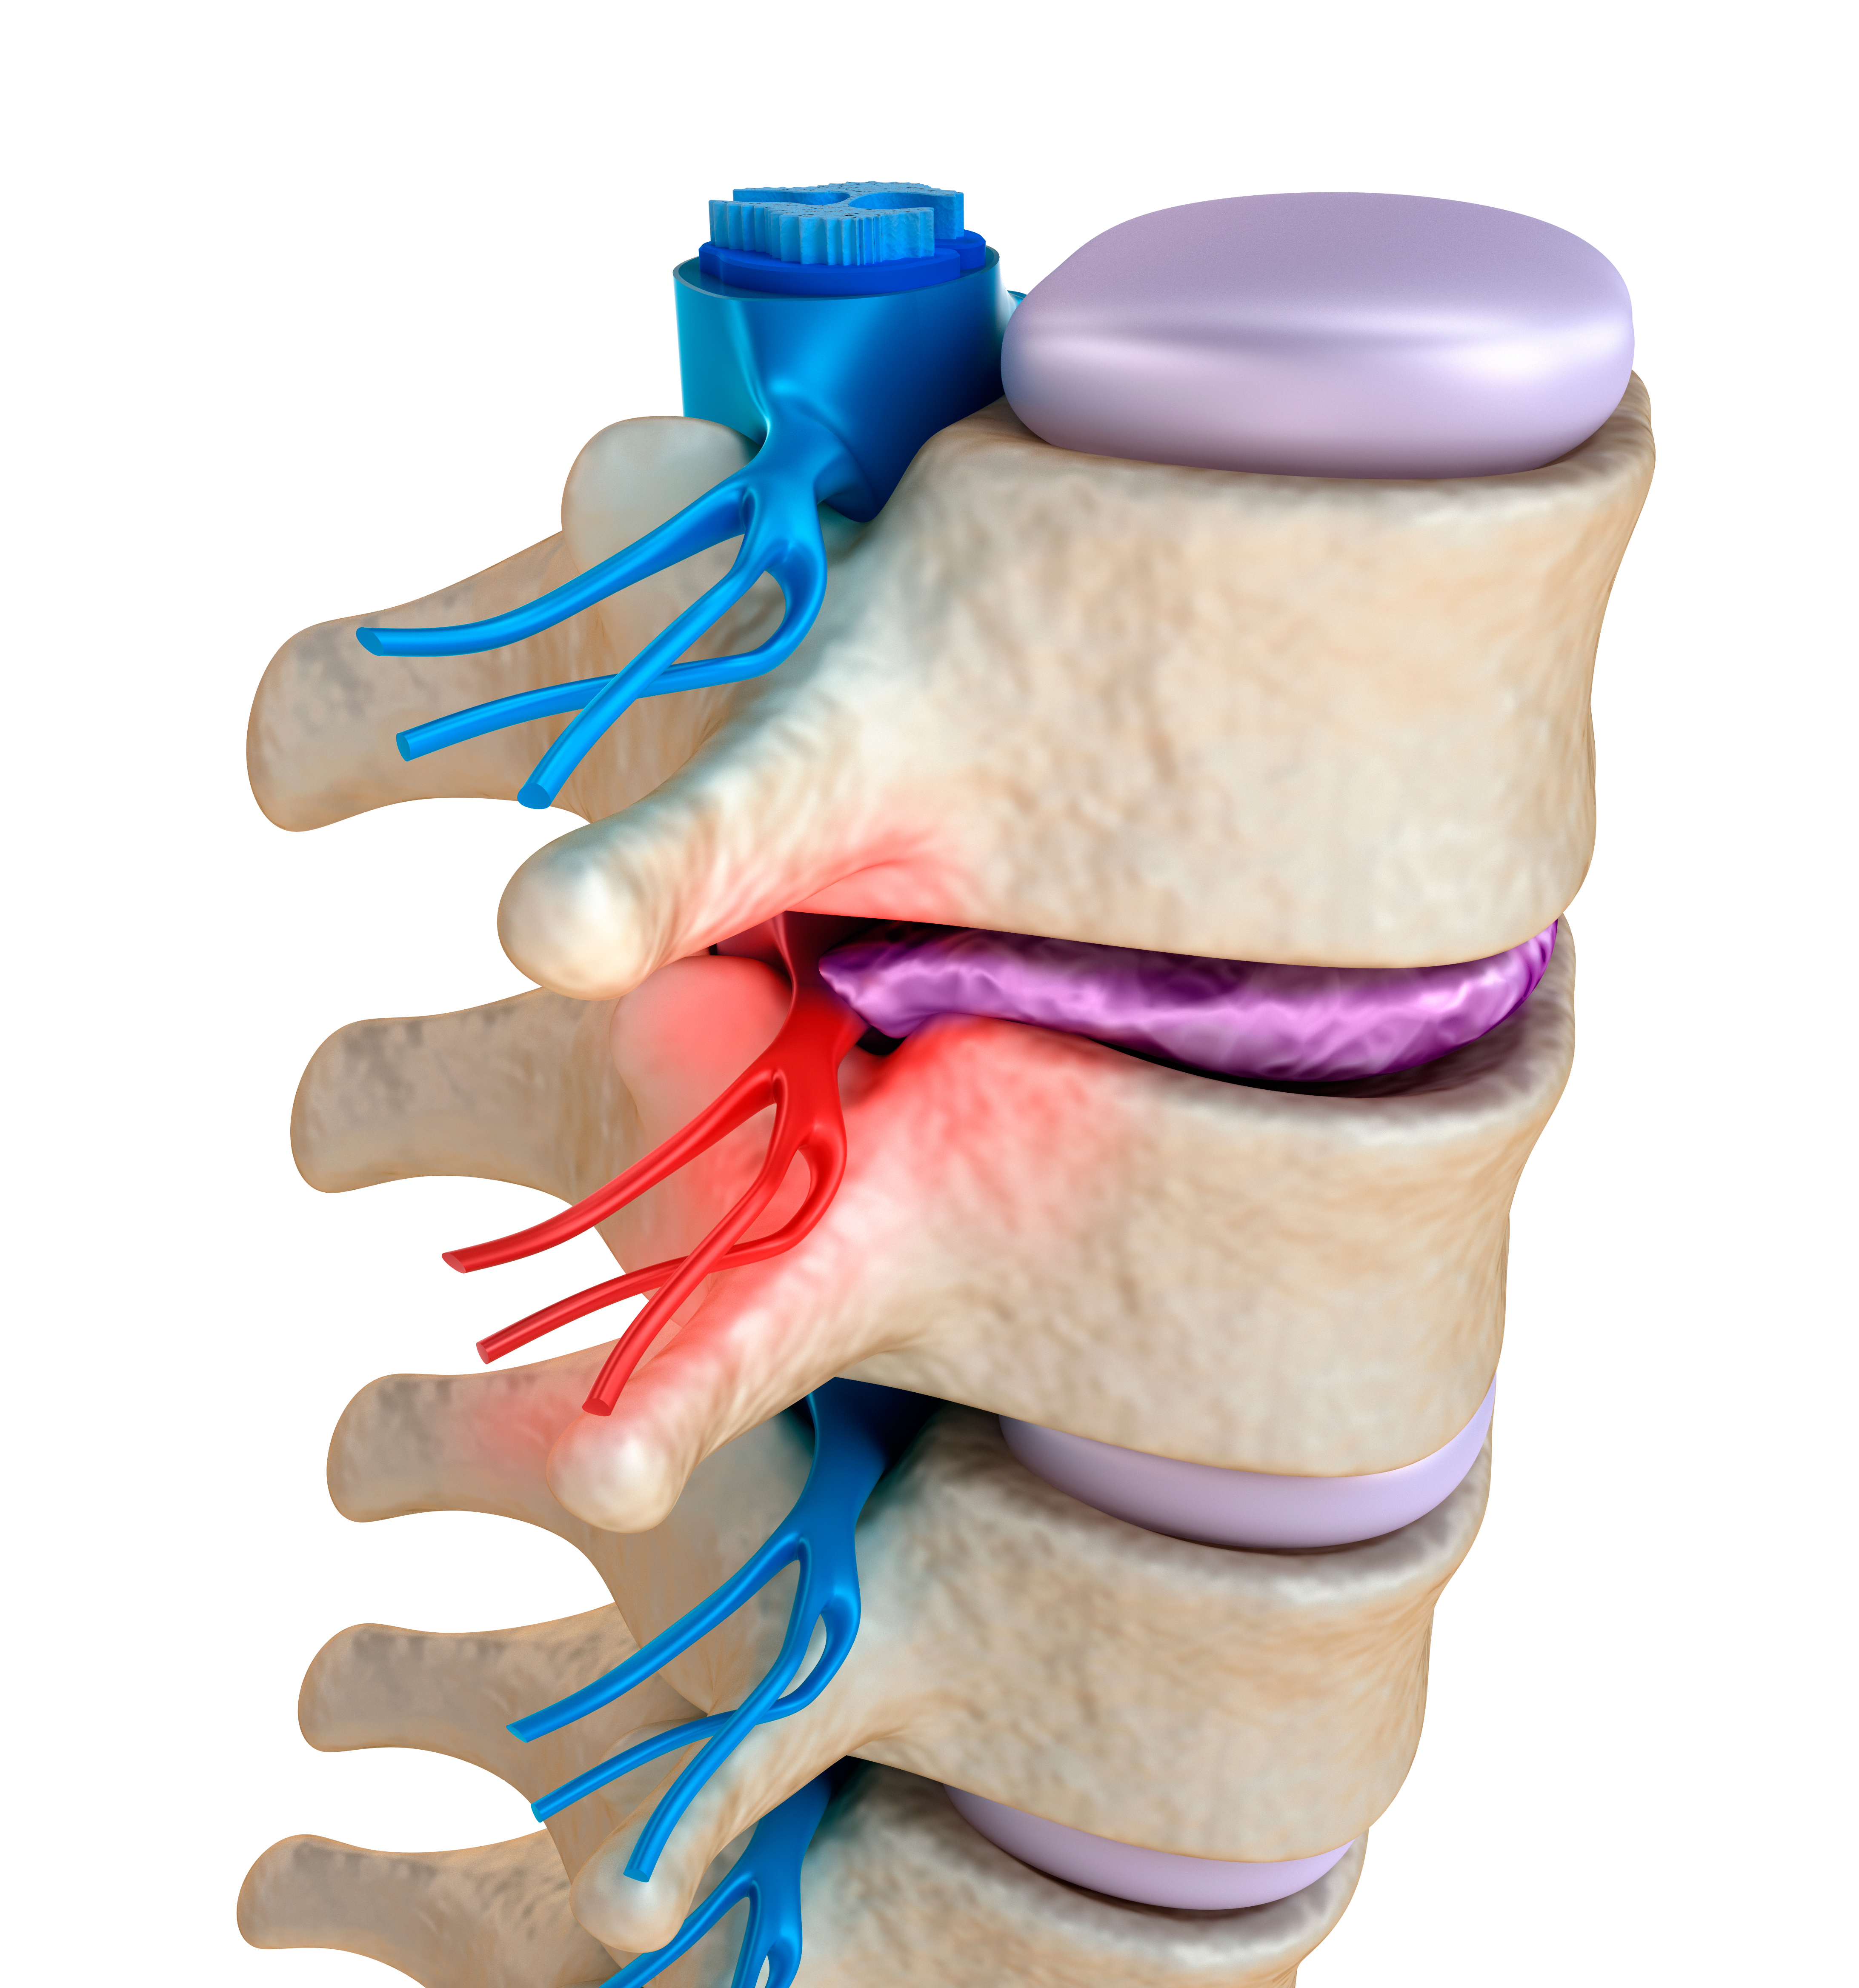 Pinched Nerve Symptoms and Treatments - Spine Institute